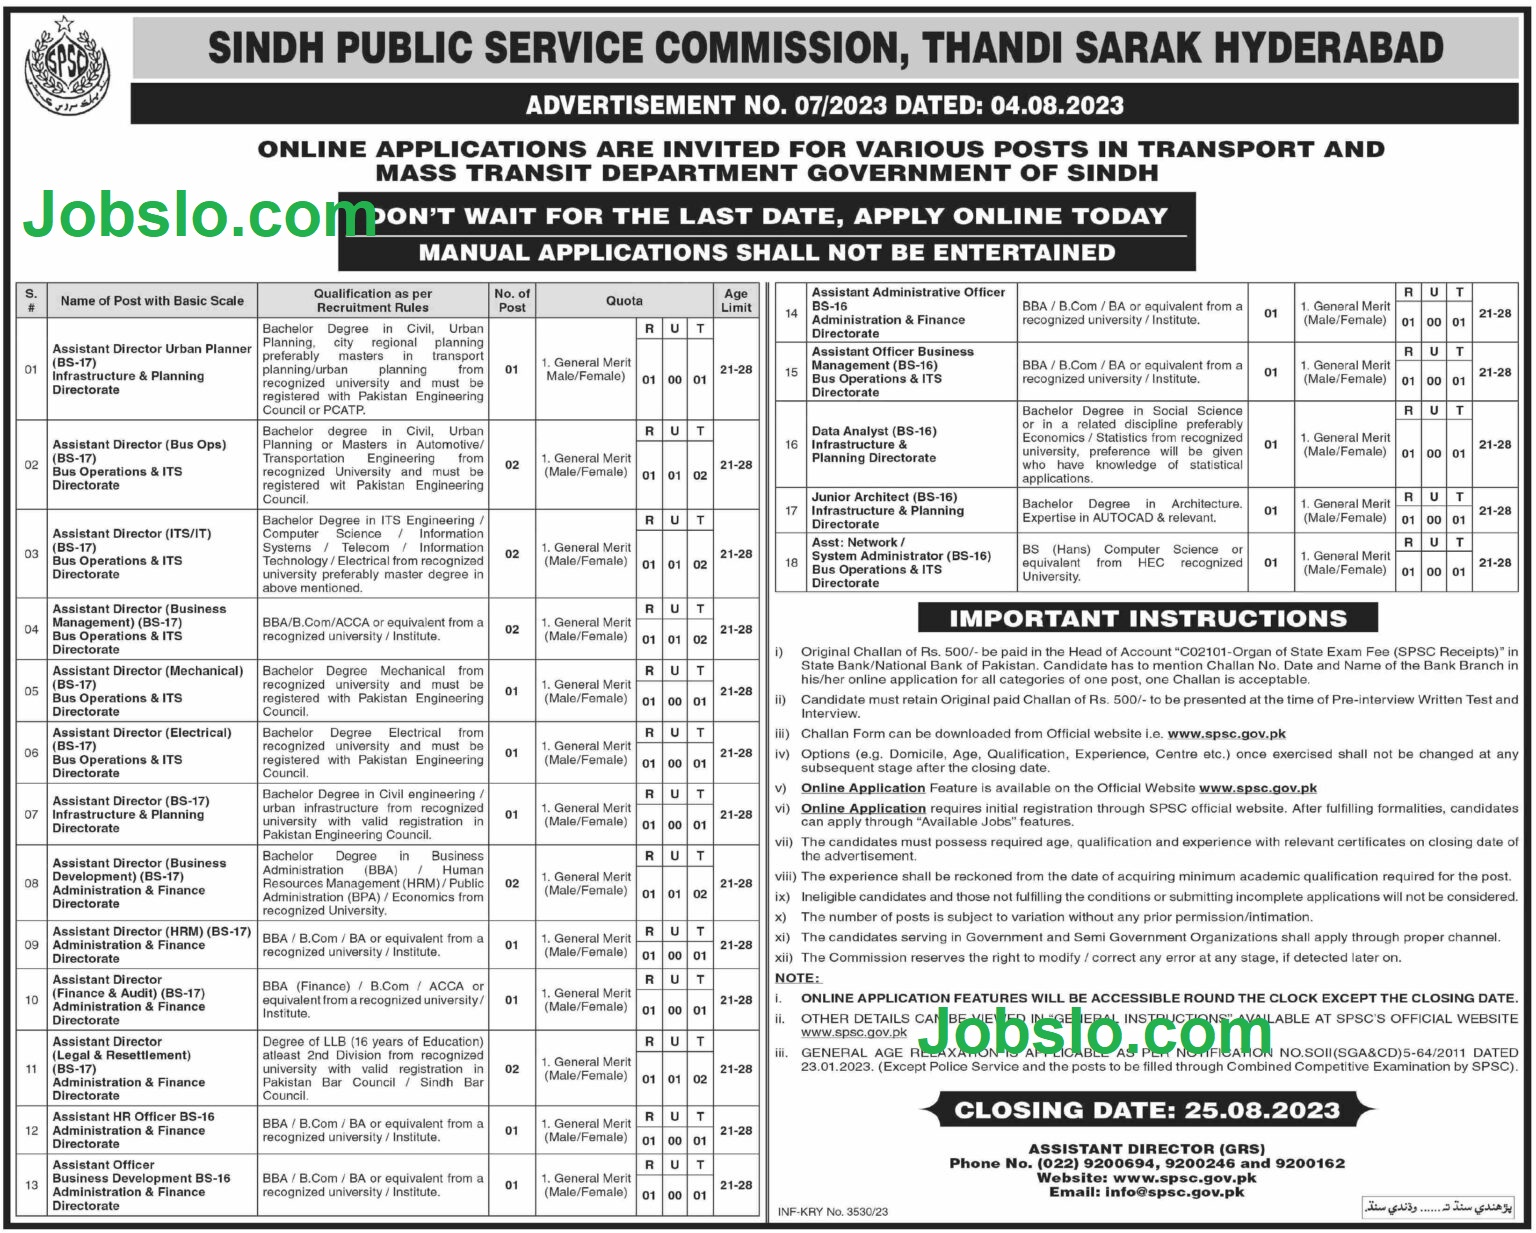 Latest SPSC Jobs Advertisement 2023: Join Sindh Public Service Commission for Exciting Opportunities Advertisement